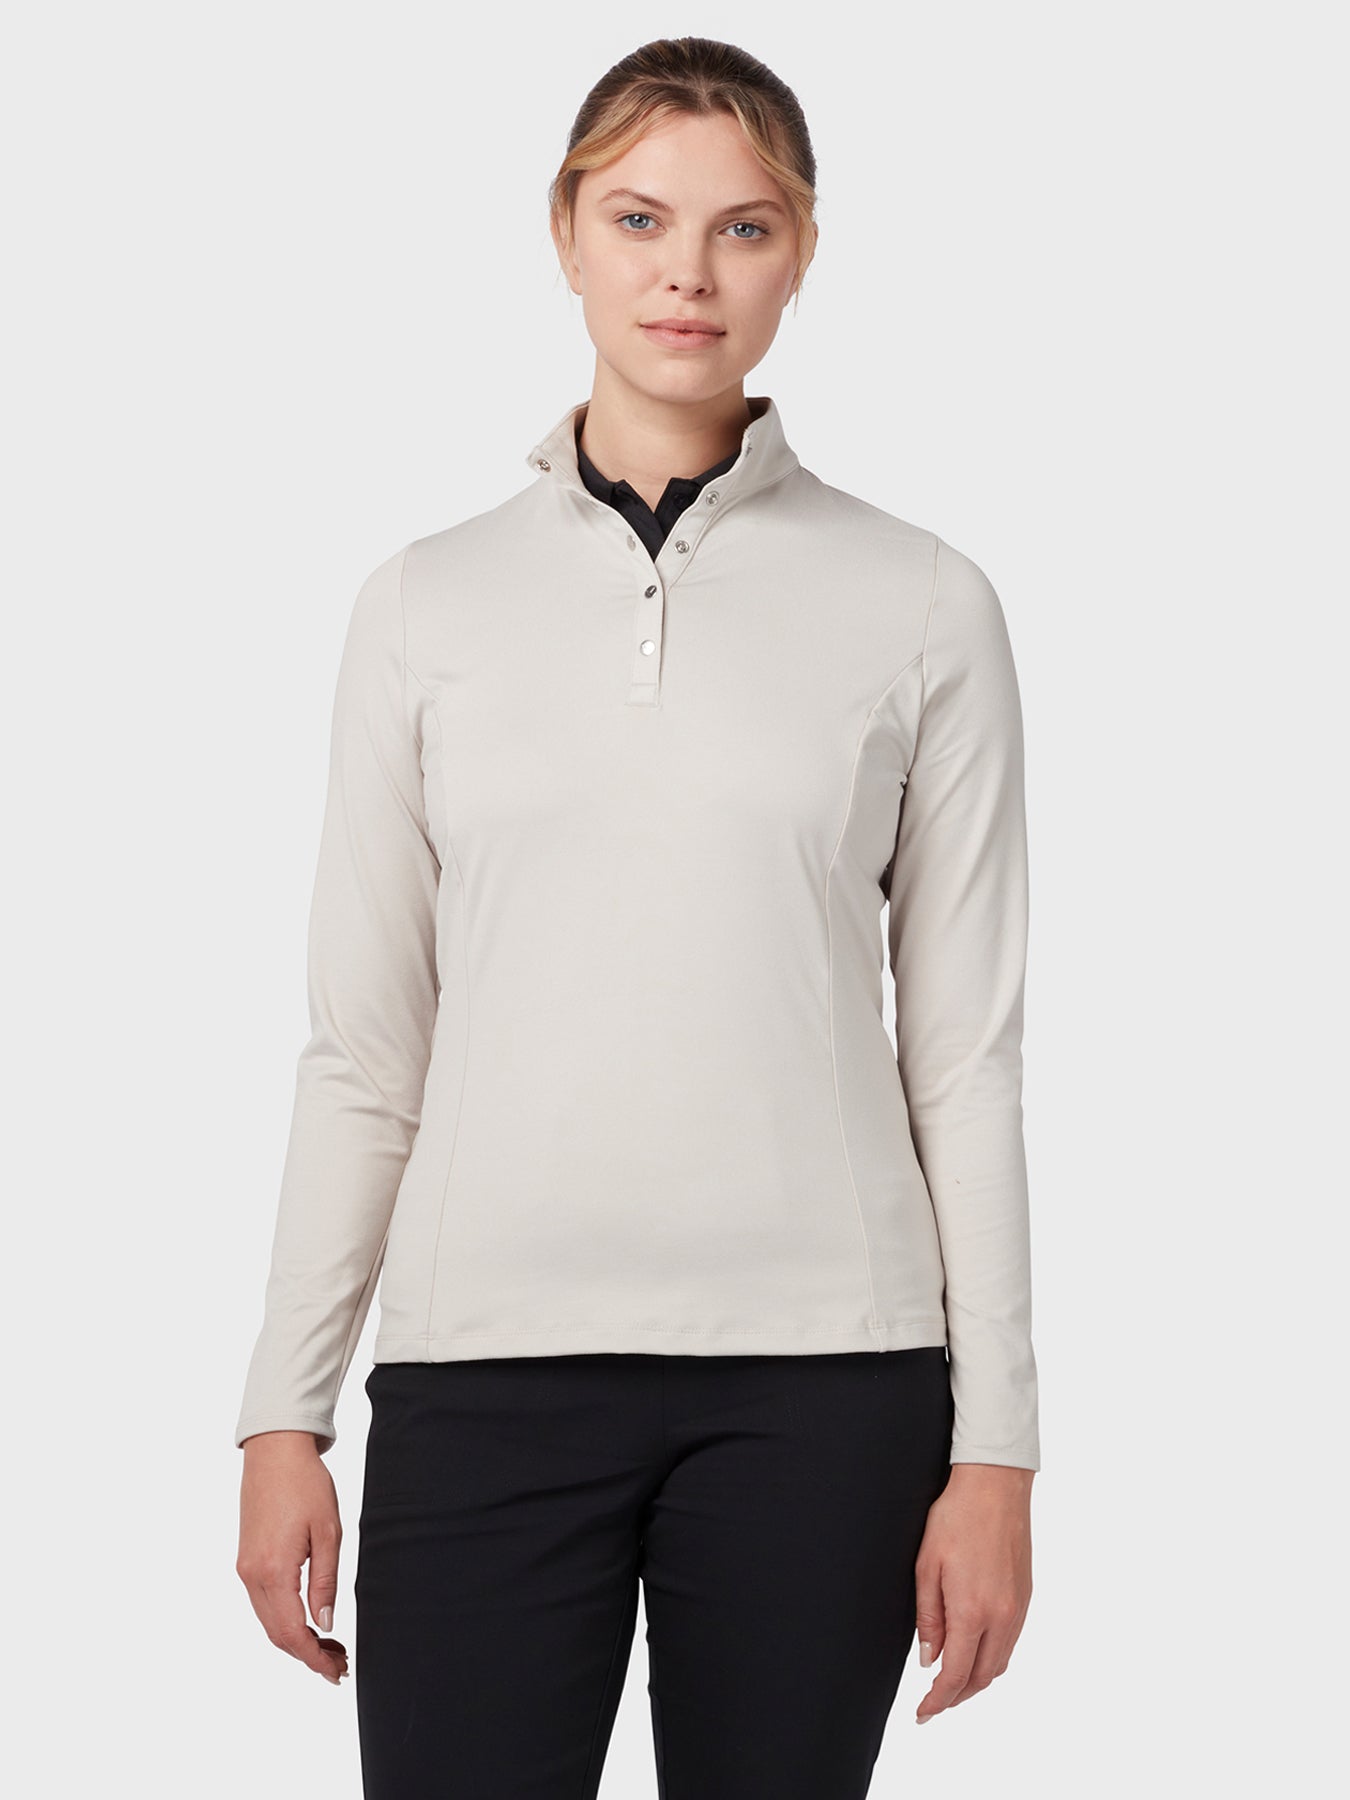 View Womens Thermal Longsleeve Fleece Back Jersey Polo In Chateau Grey Chateau Grey S information